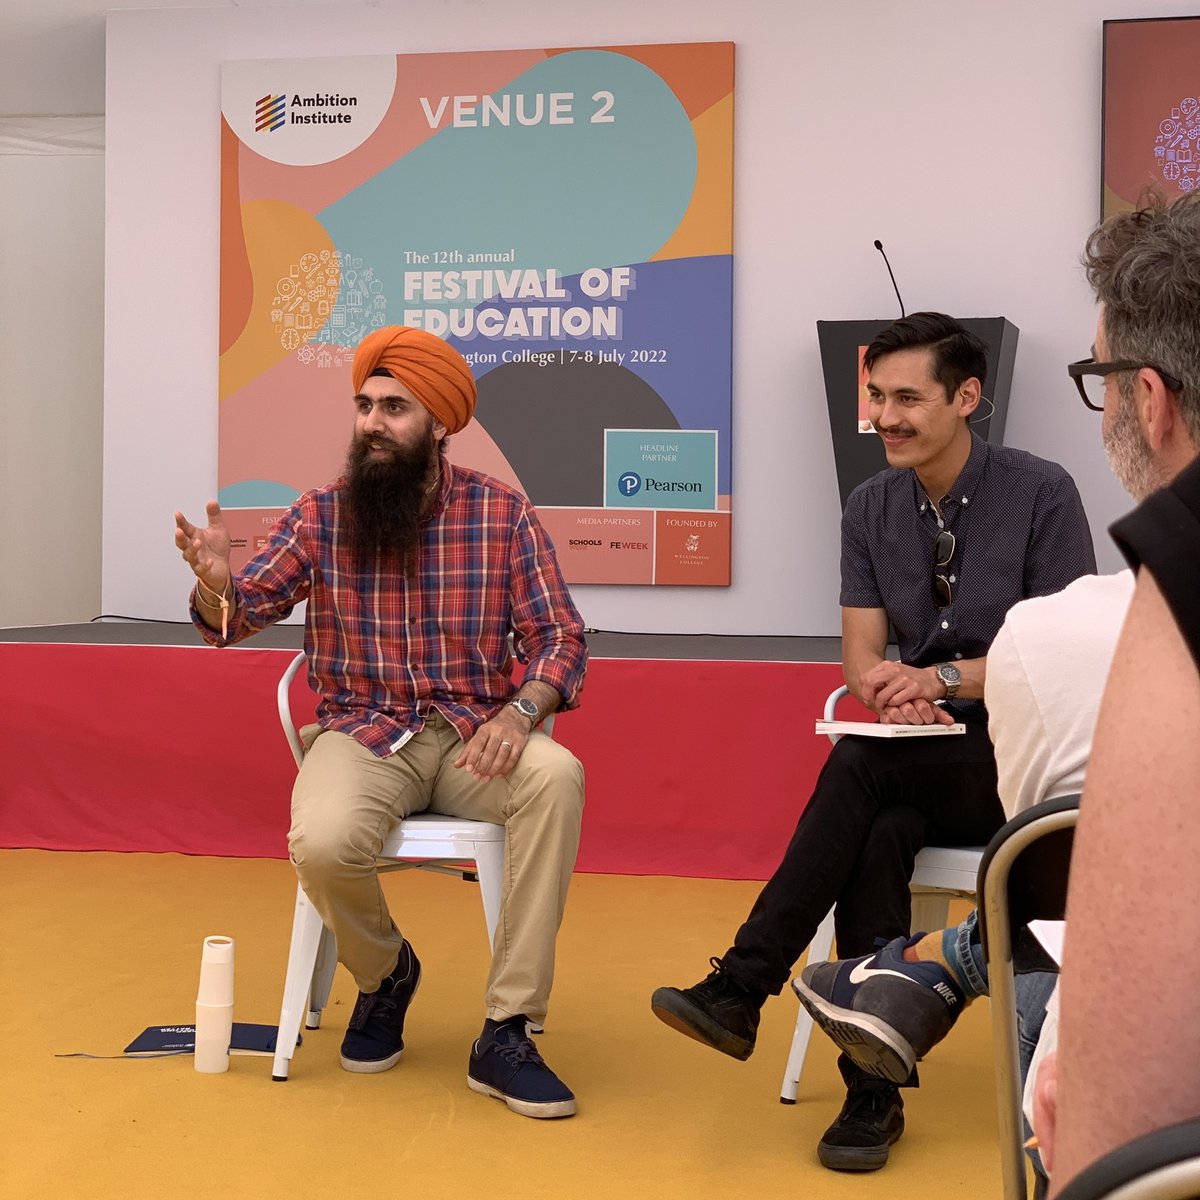 “If teaching stops in the classroom, we haven’t done our job. But students need the tools to be lifelong learners. We need to model those tools.”

I snuck in late but so great to see Amarbeer Singh Gill - @InspiredLearn_ - in action at #EducationFest.